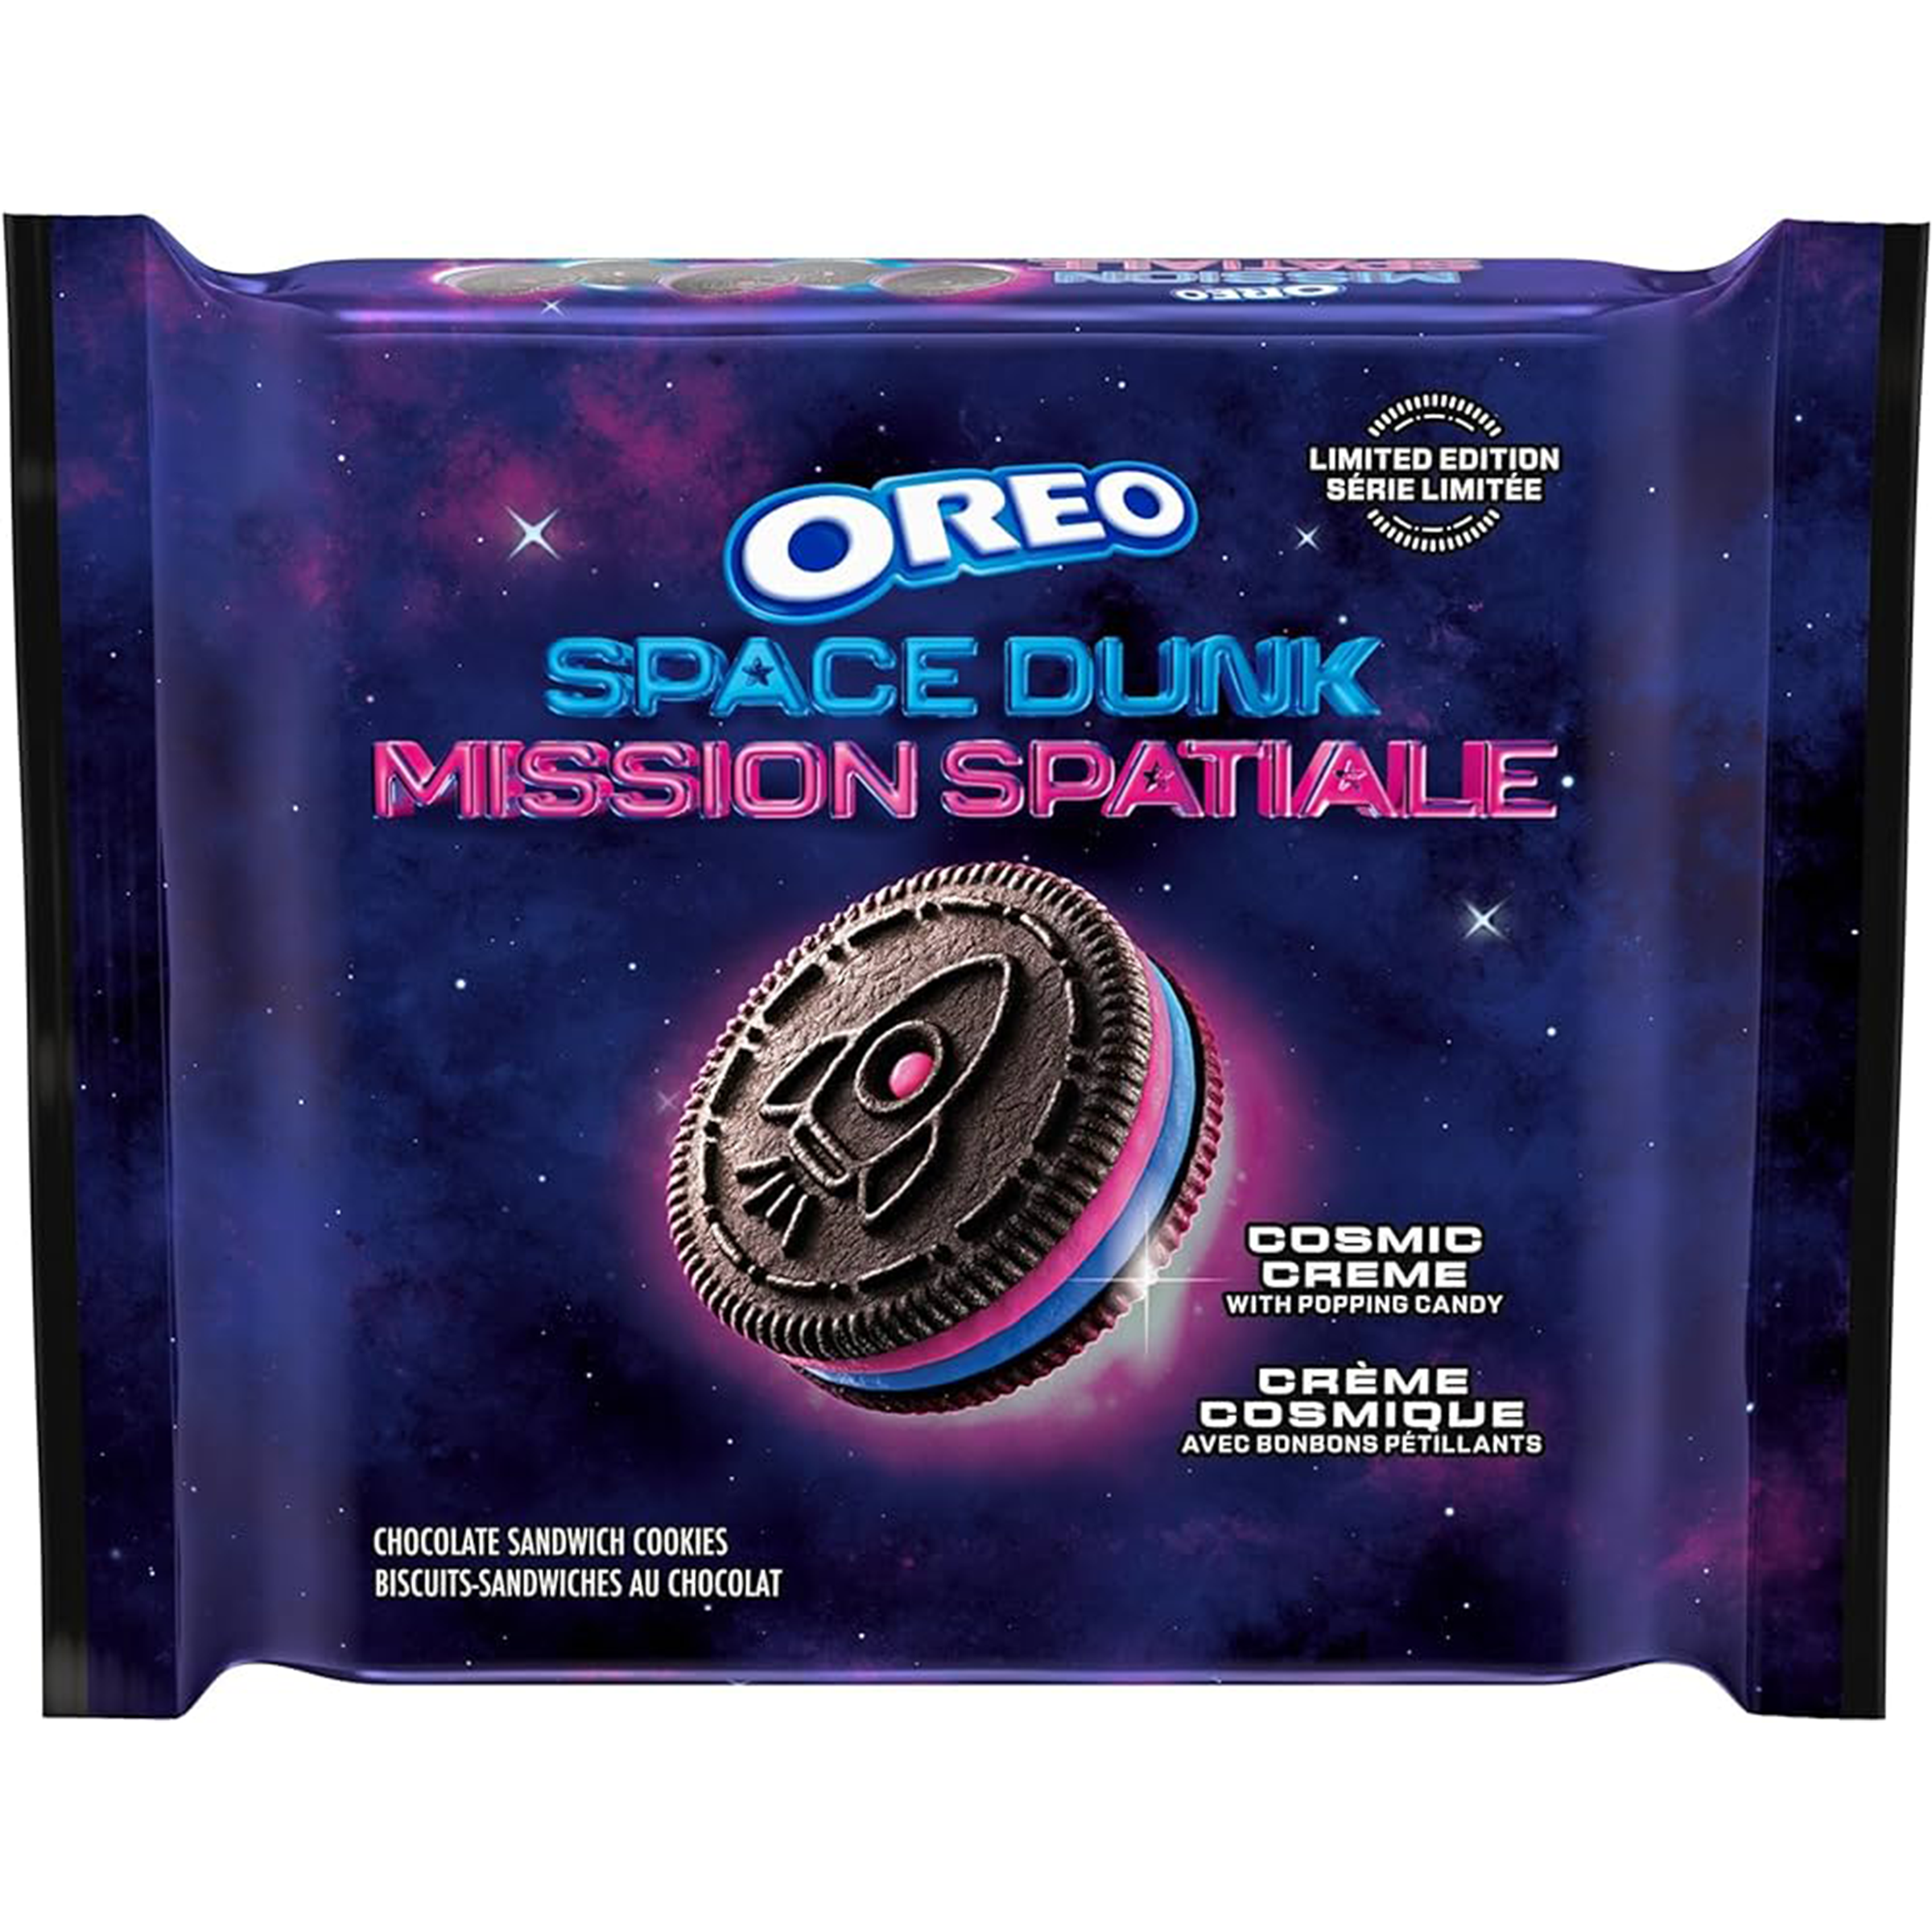 Oreo Cookies - Space Dunk Cosmic Creme With Popping Candy